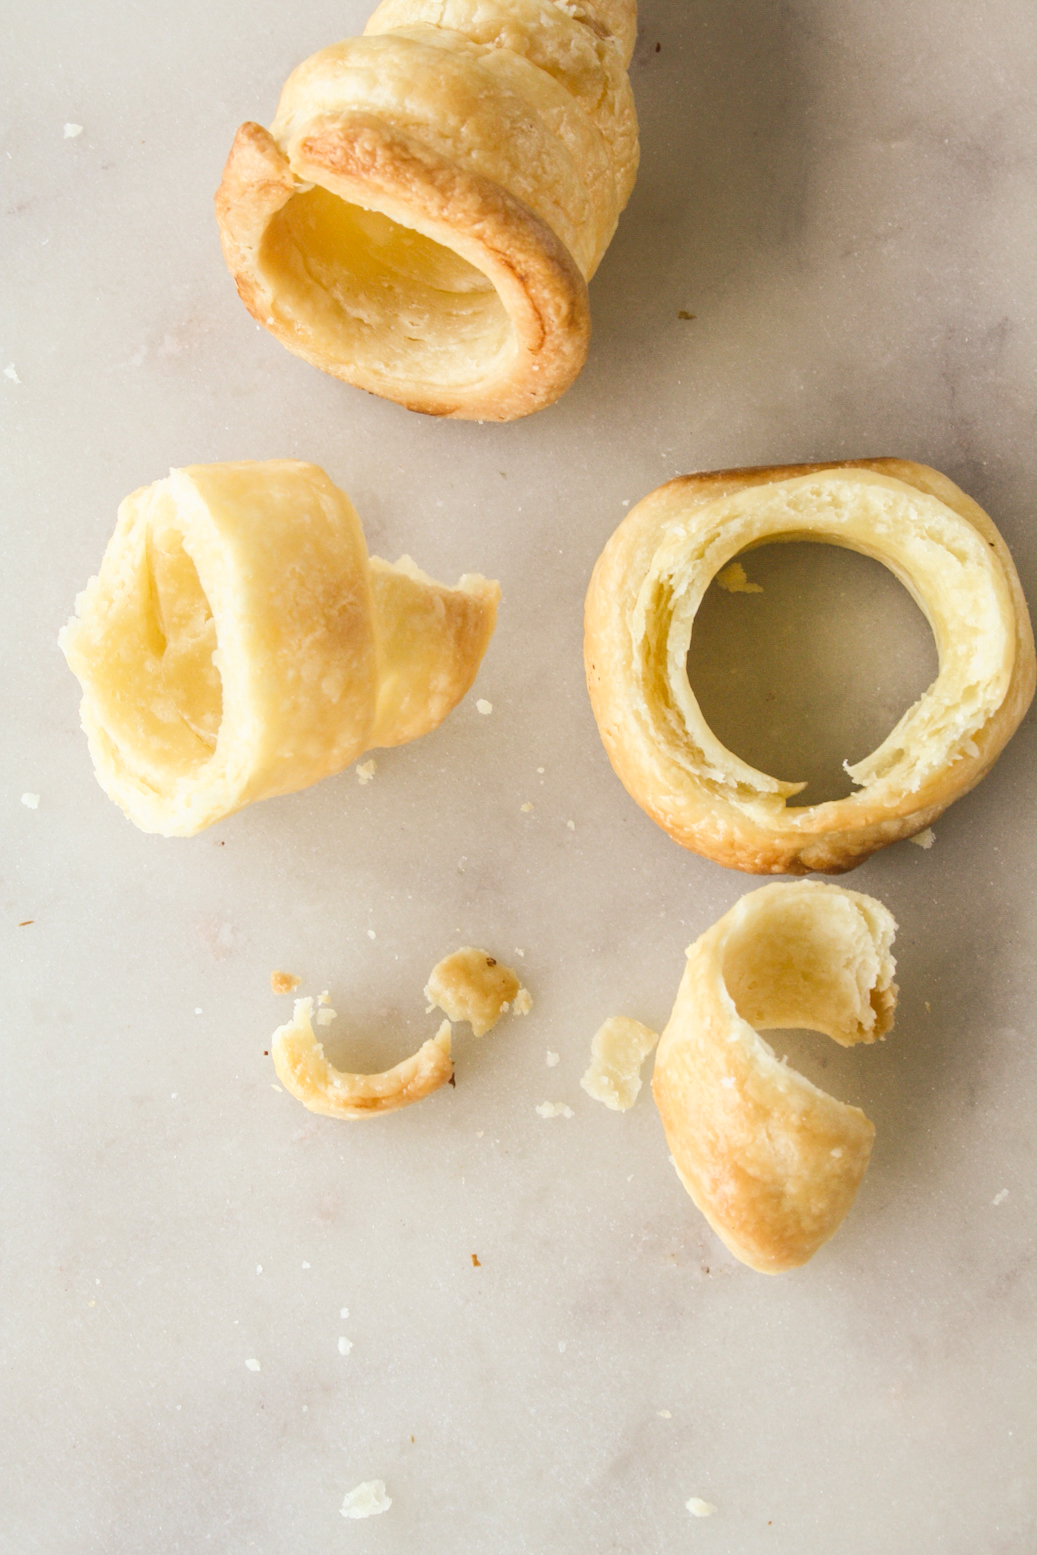 Homemade all-butter puff pastry rolls filled with vanilla whipped cream